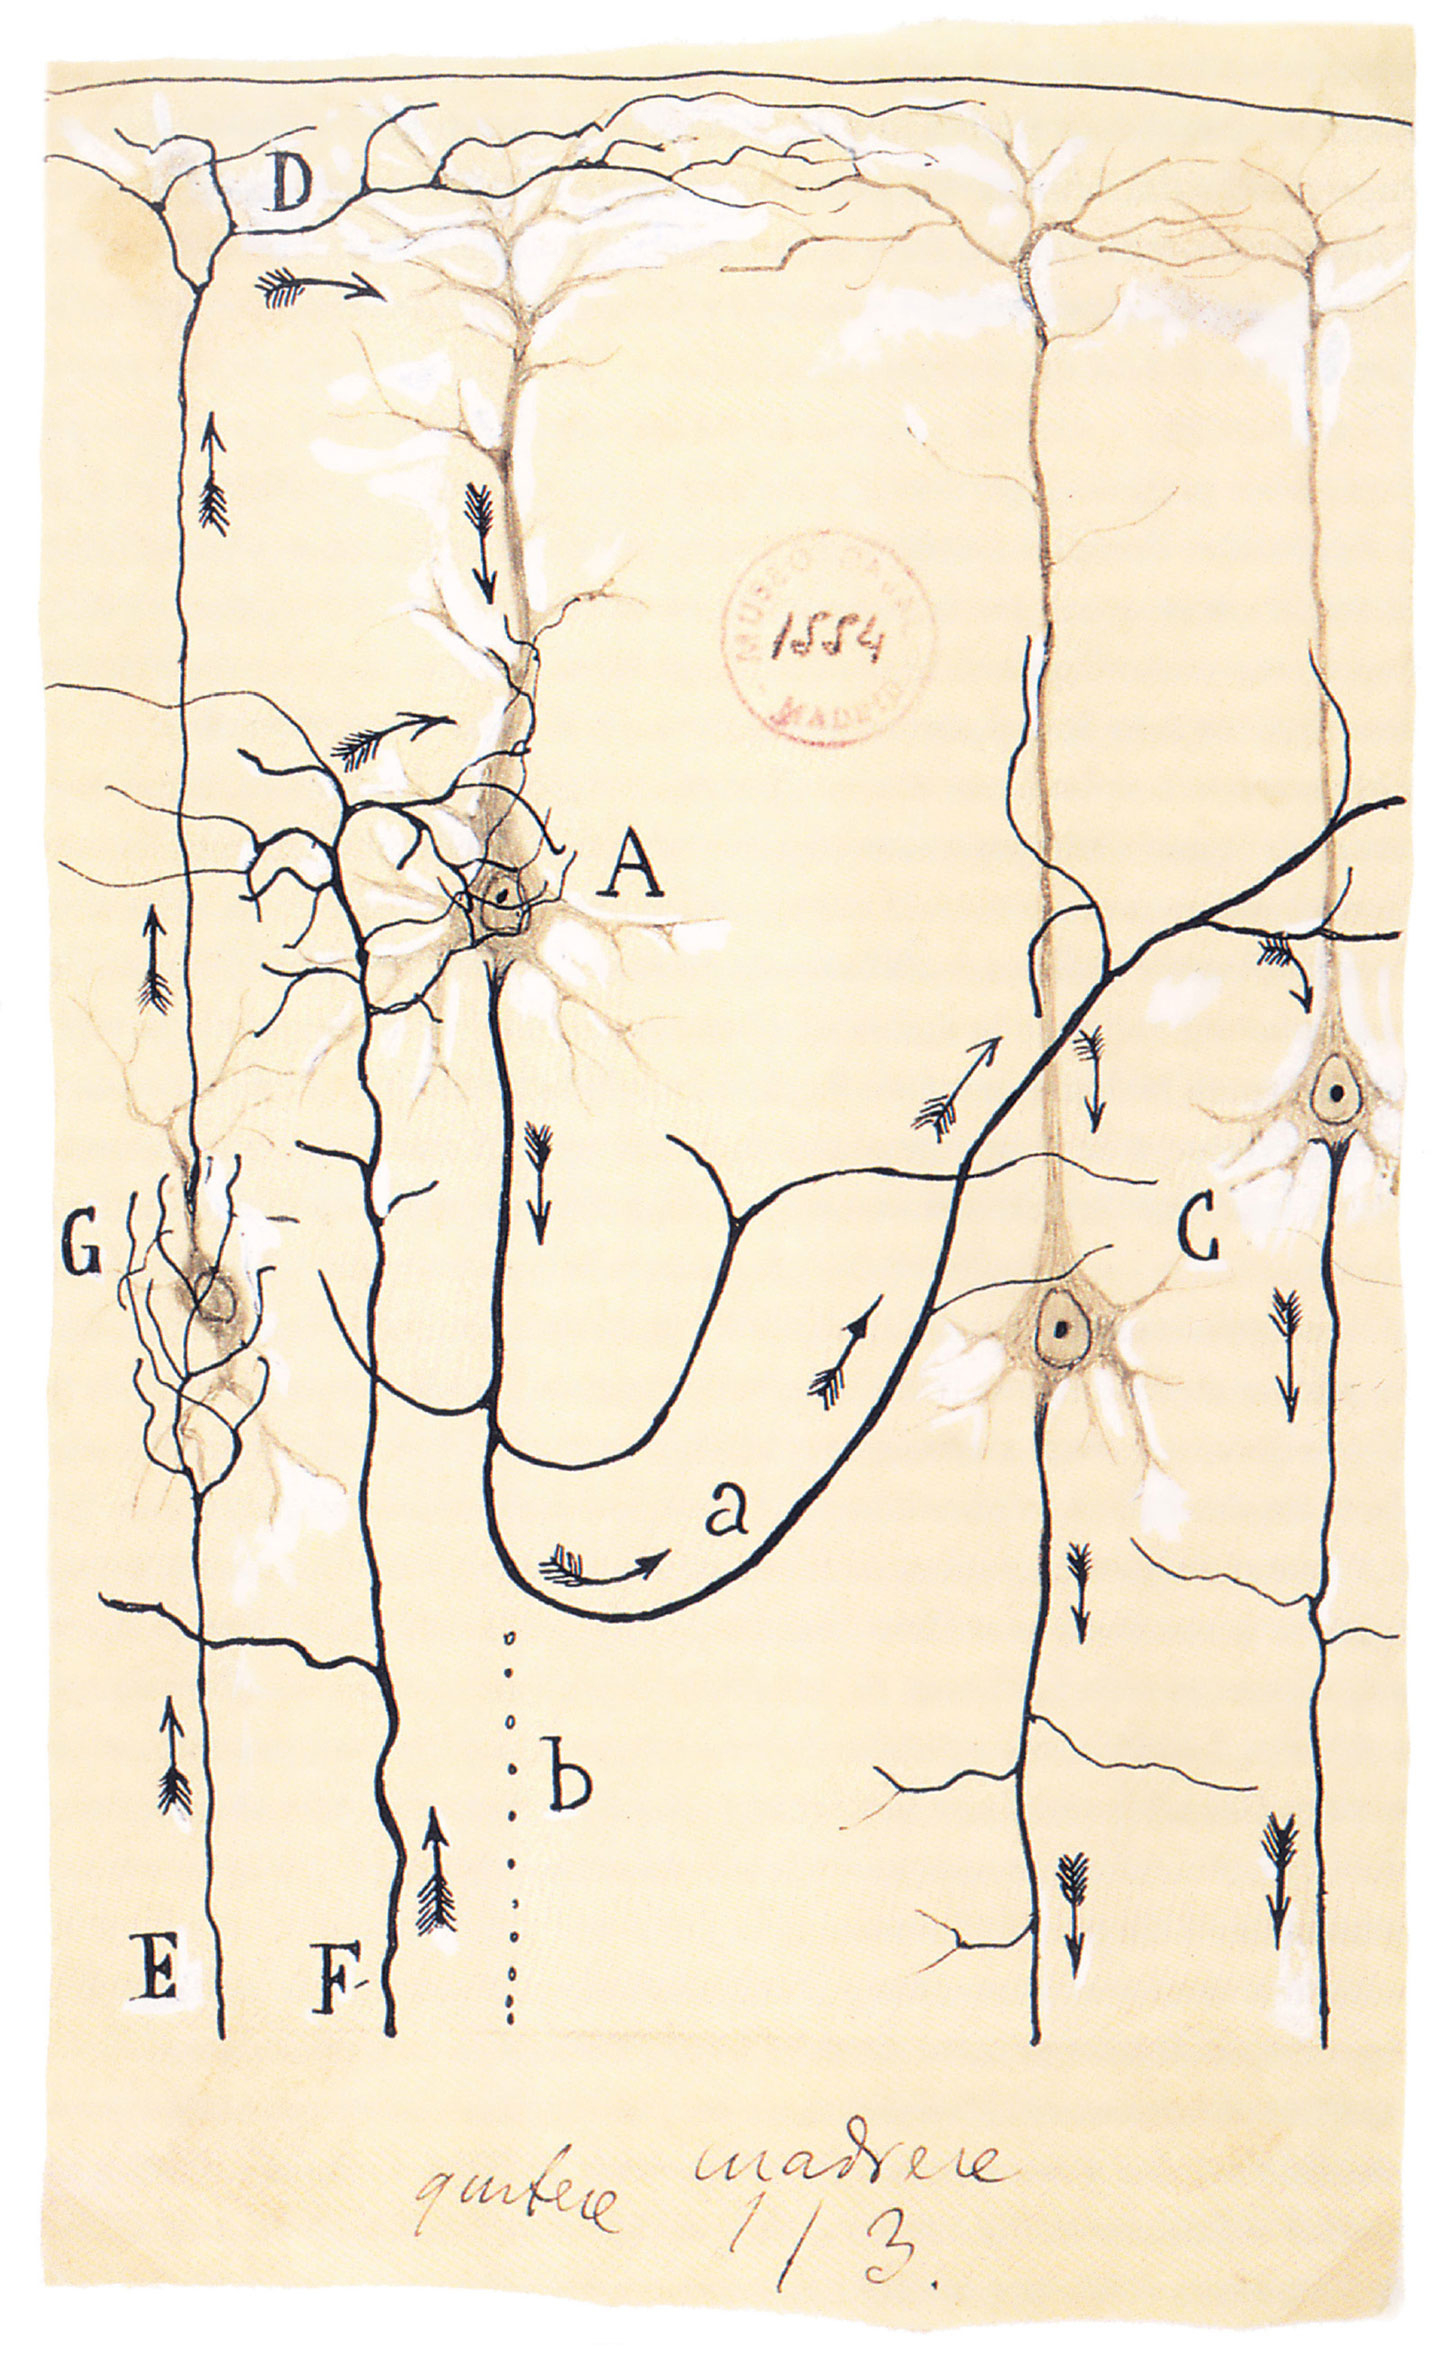 An illustration by Santiago Ramón y Cajal which indicates the flow of currents in the brain. 